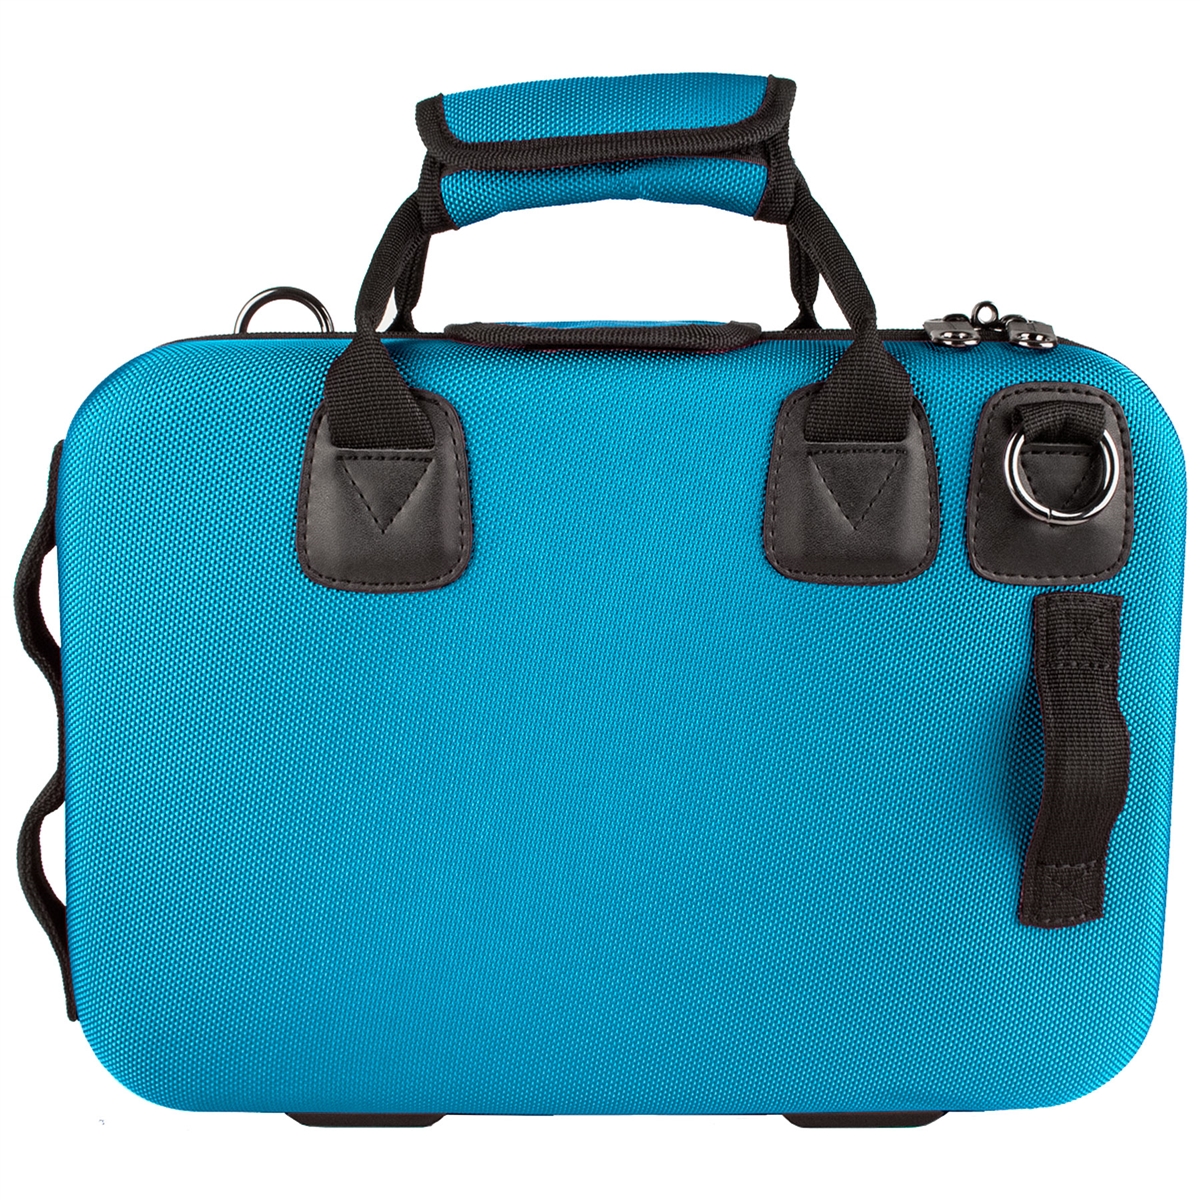 Protec PB307-TB Case for Clarinet - Teal Blue